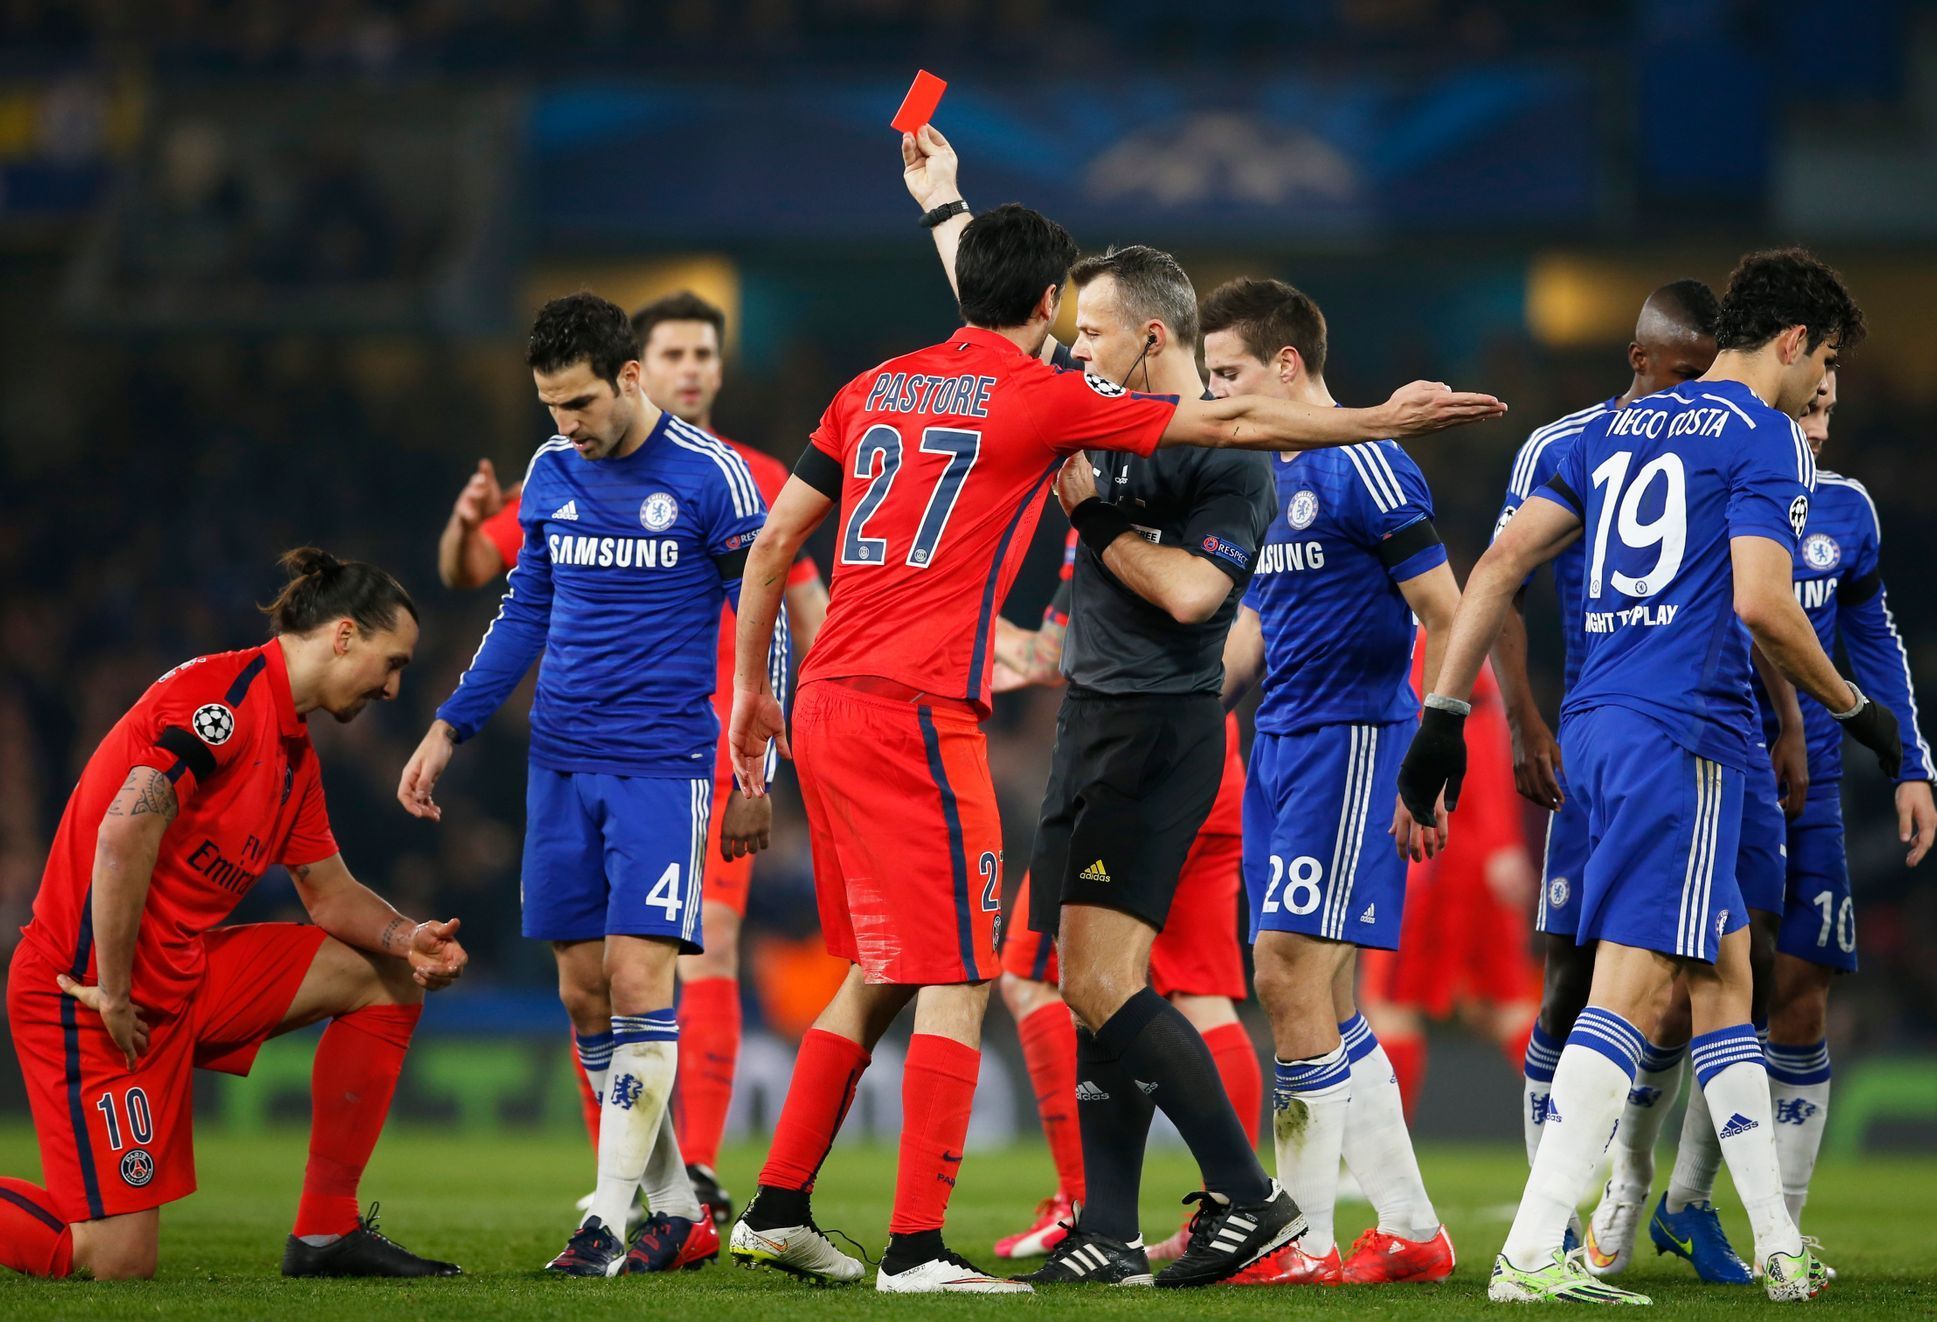 Football: PSG's Zlatan Ibrahimovic is shown a red card by referee Bjorn Kuipers